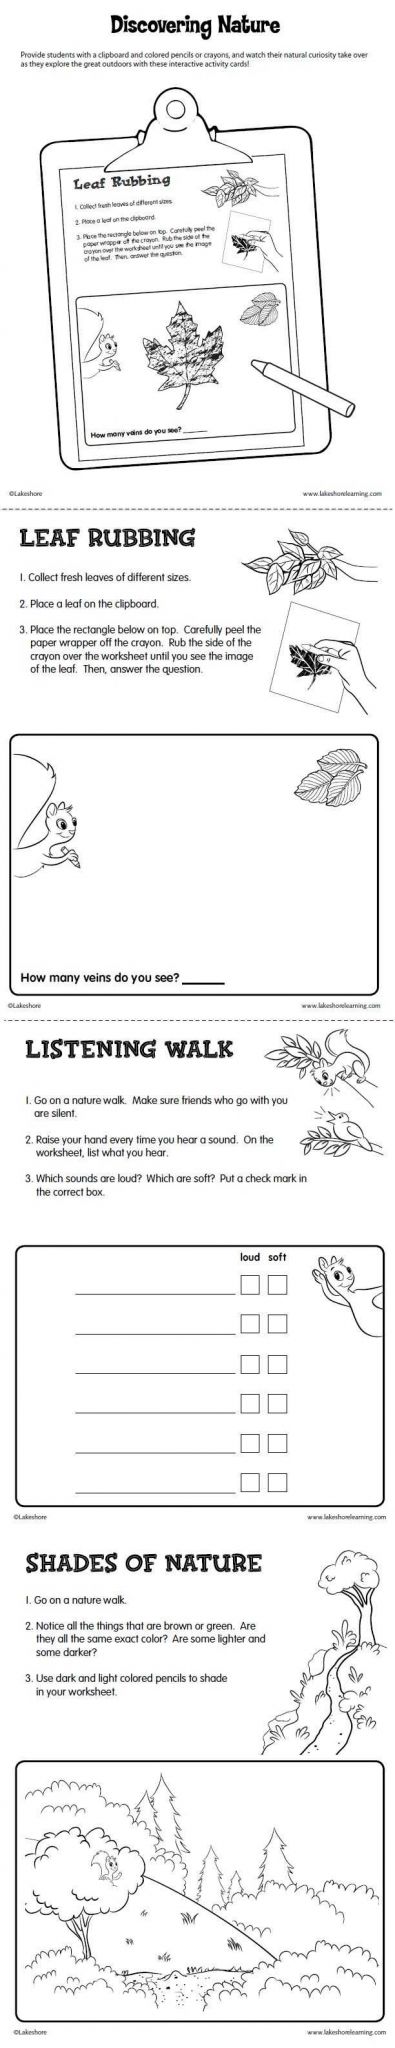 Bill Nye Light Optics Worksheet Answers and 383 Best Home School Science Images On Pinterest